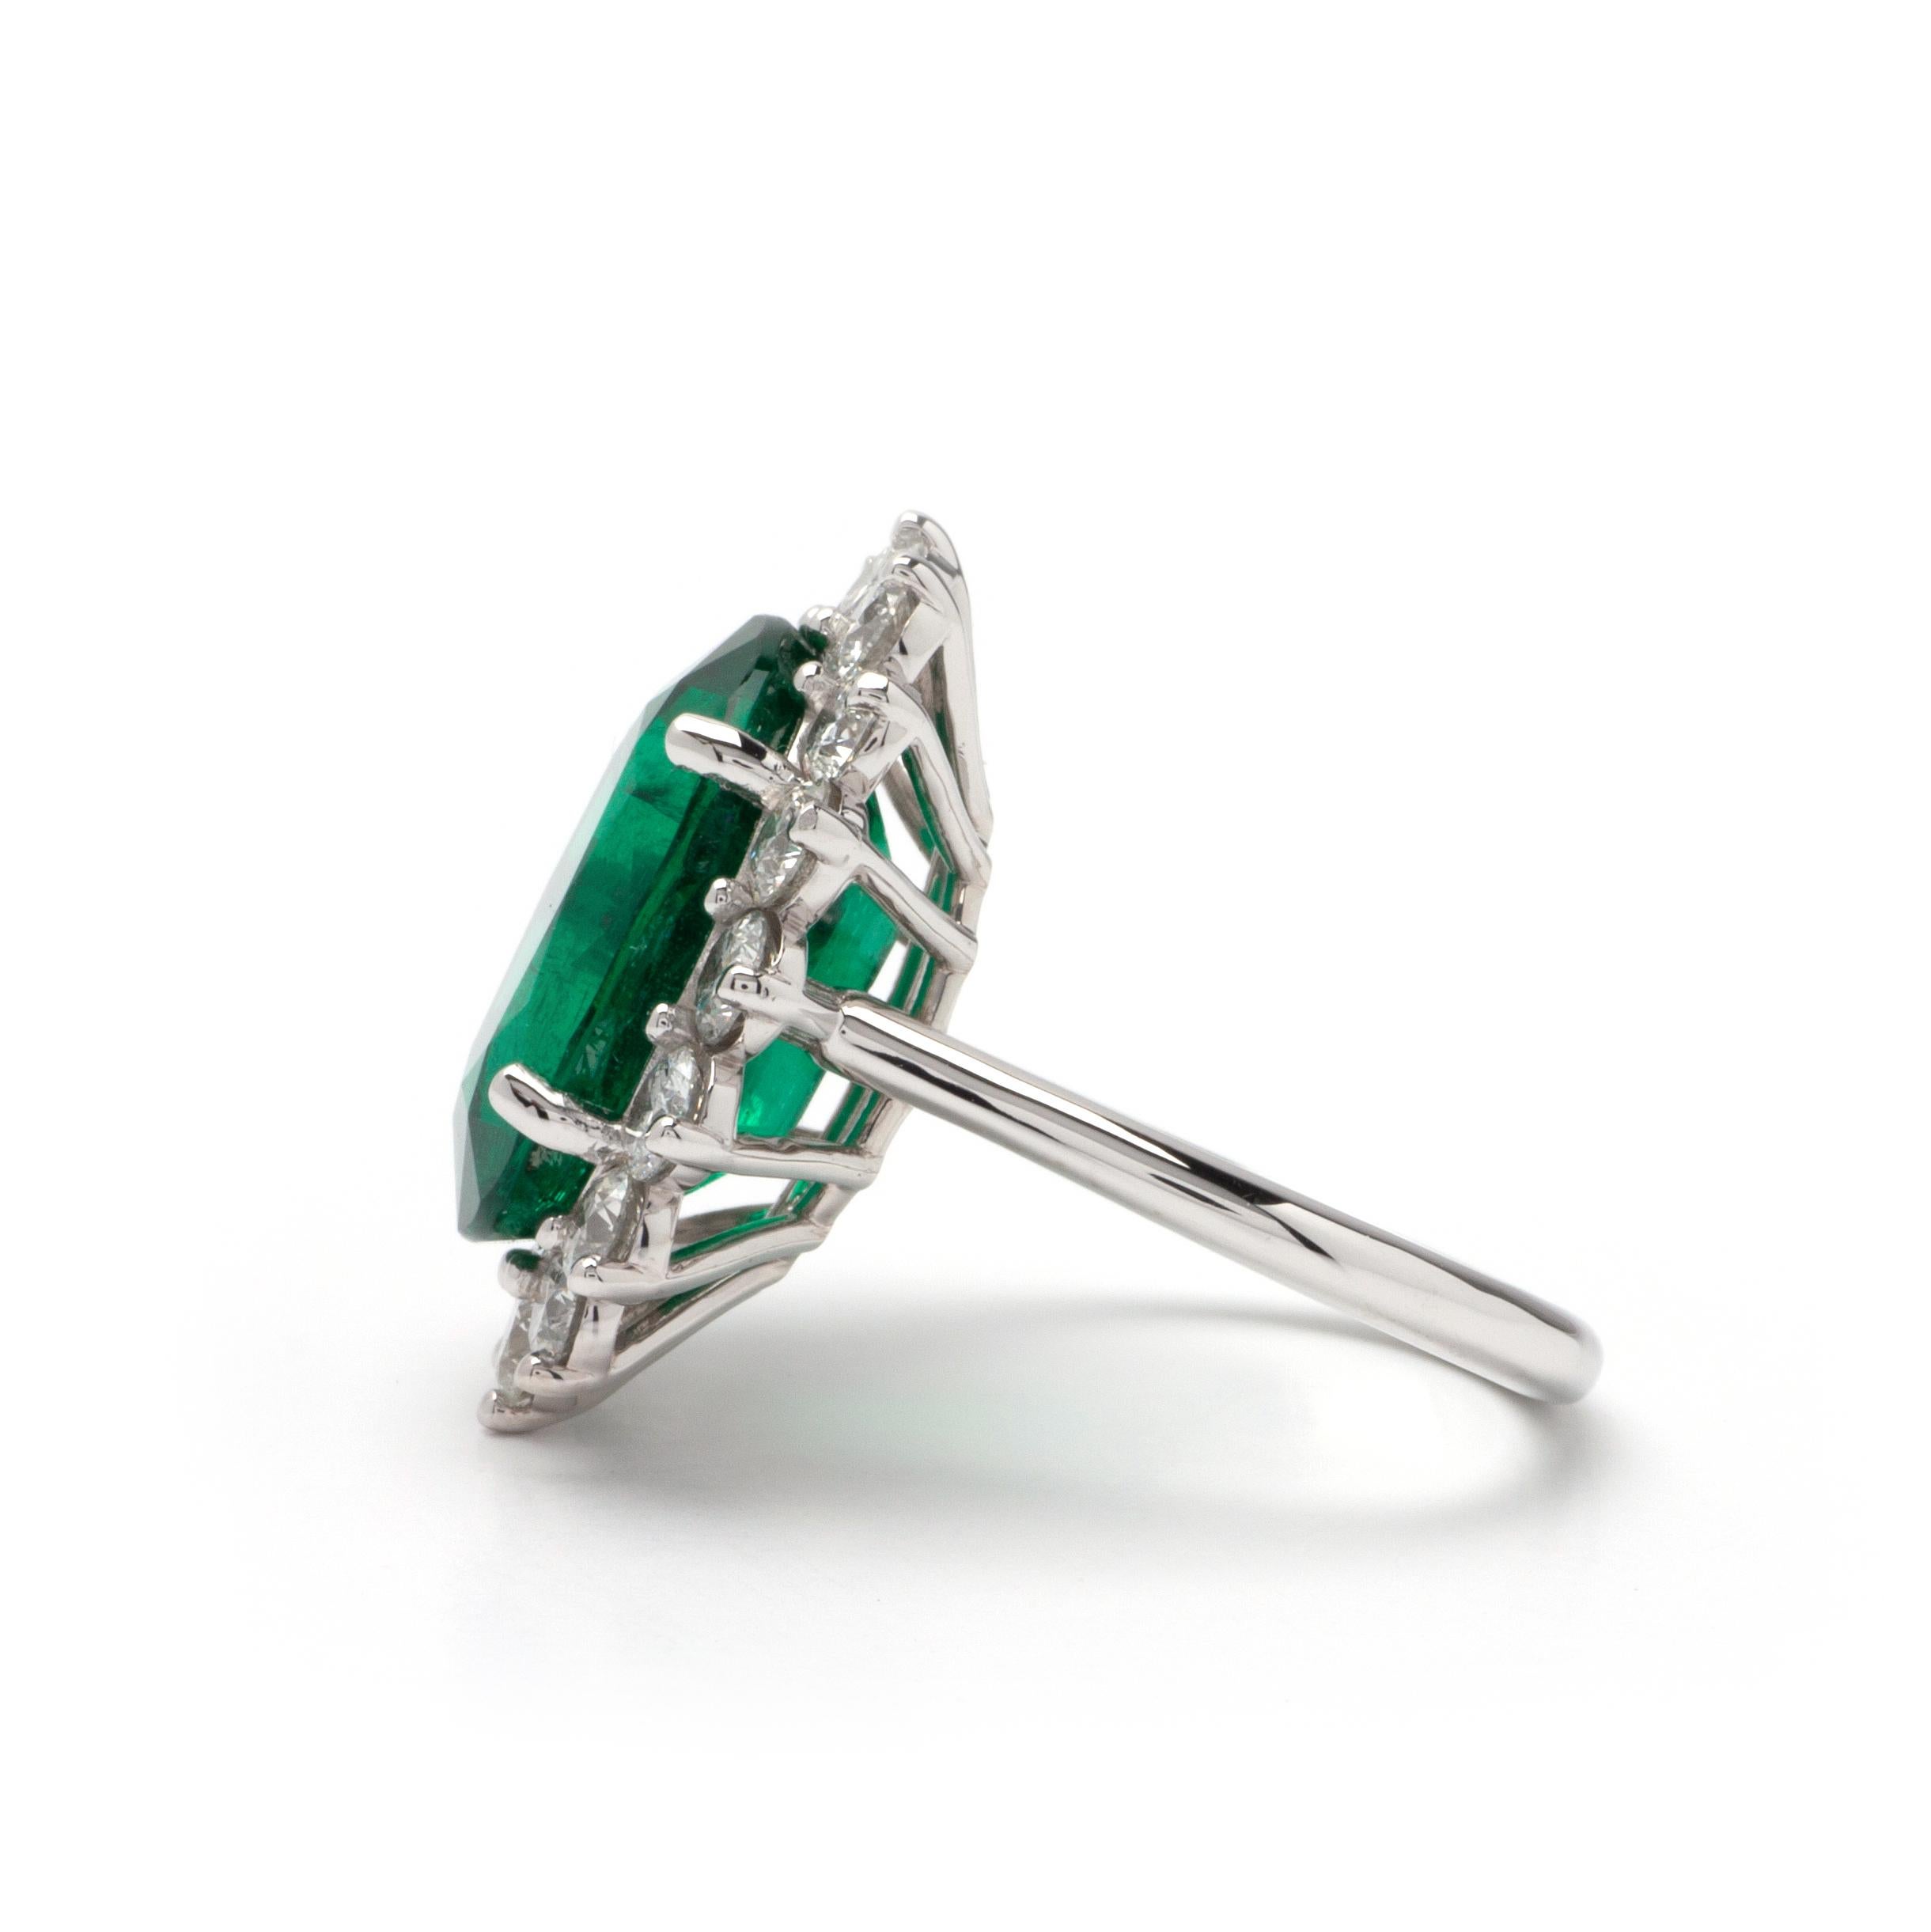 This ring features a halo design of F color, SI1 clarity, and 2.40ct Round side diamonds set in 14K white gold. The center gemstone is a 10.64ct Oval green emerald measuring 16.86 x 13.01 x 7.92mm. Finger size 7